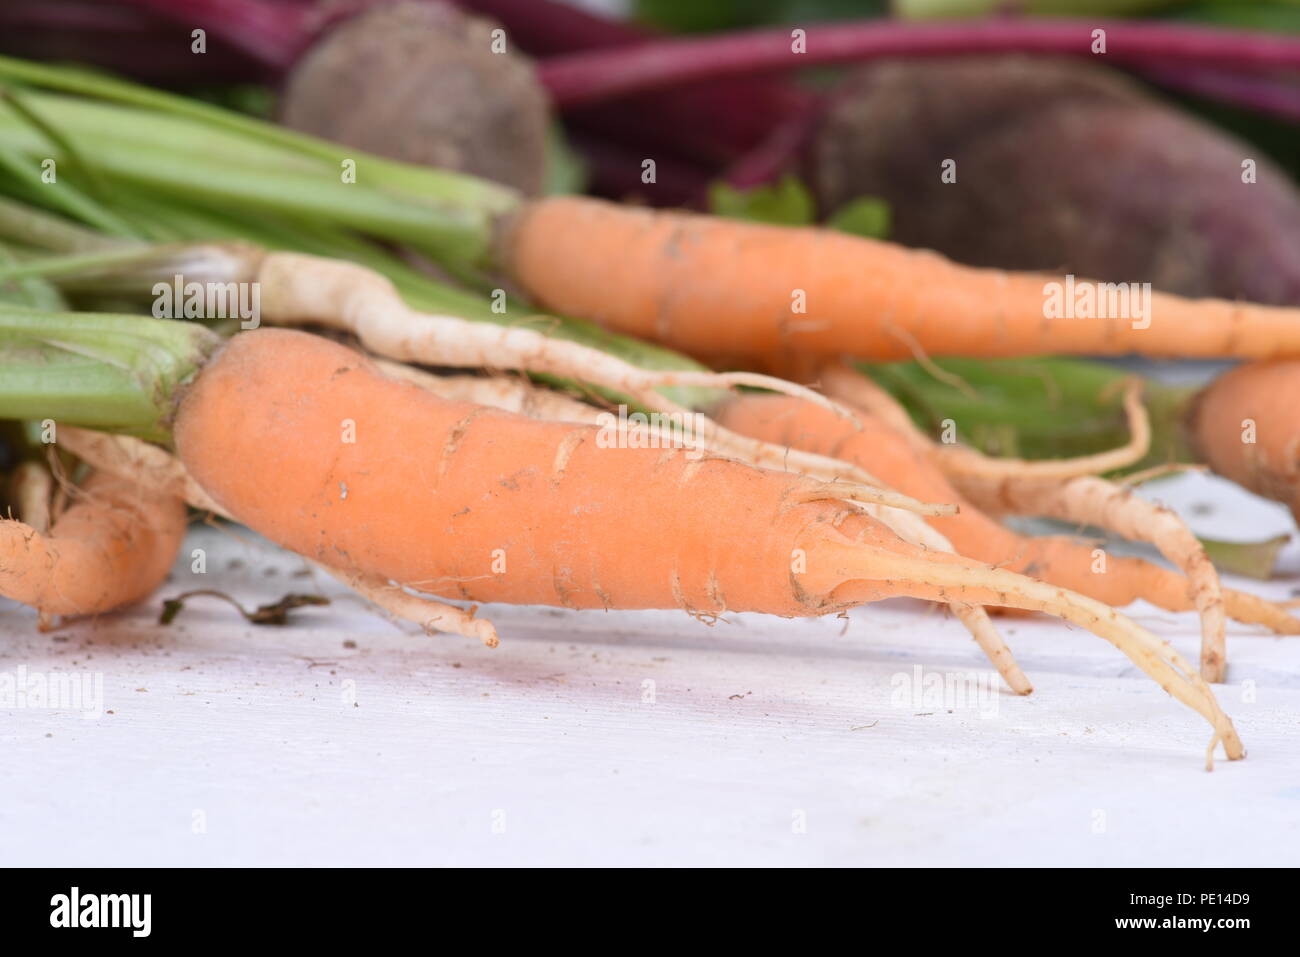 Fresh carrots closeup on wooden background Stock Photo